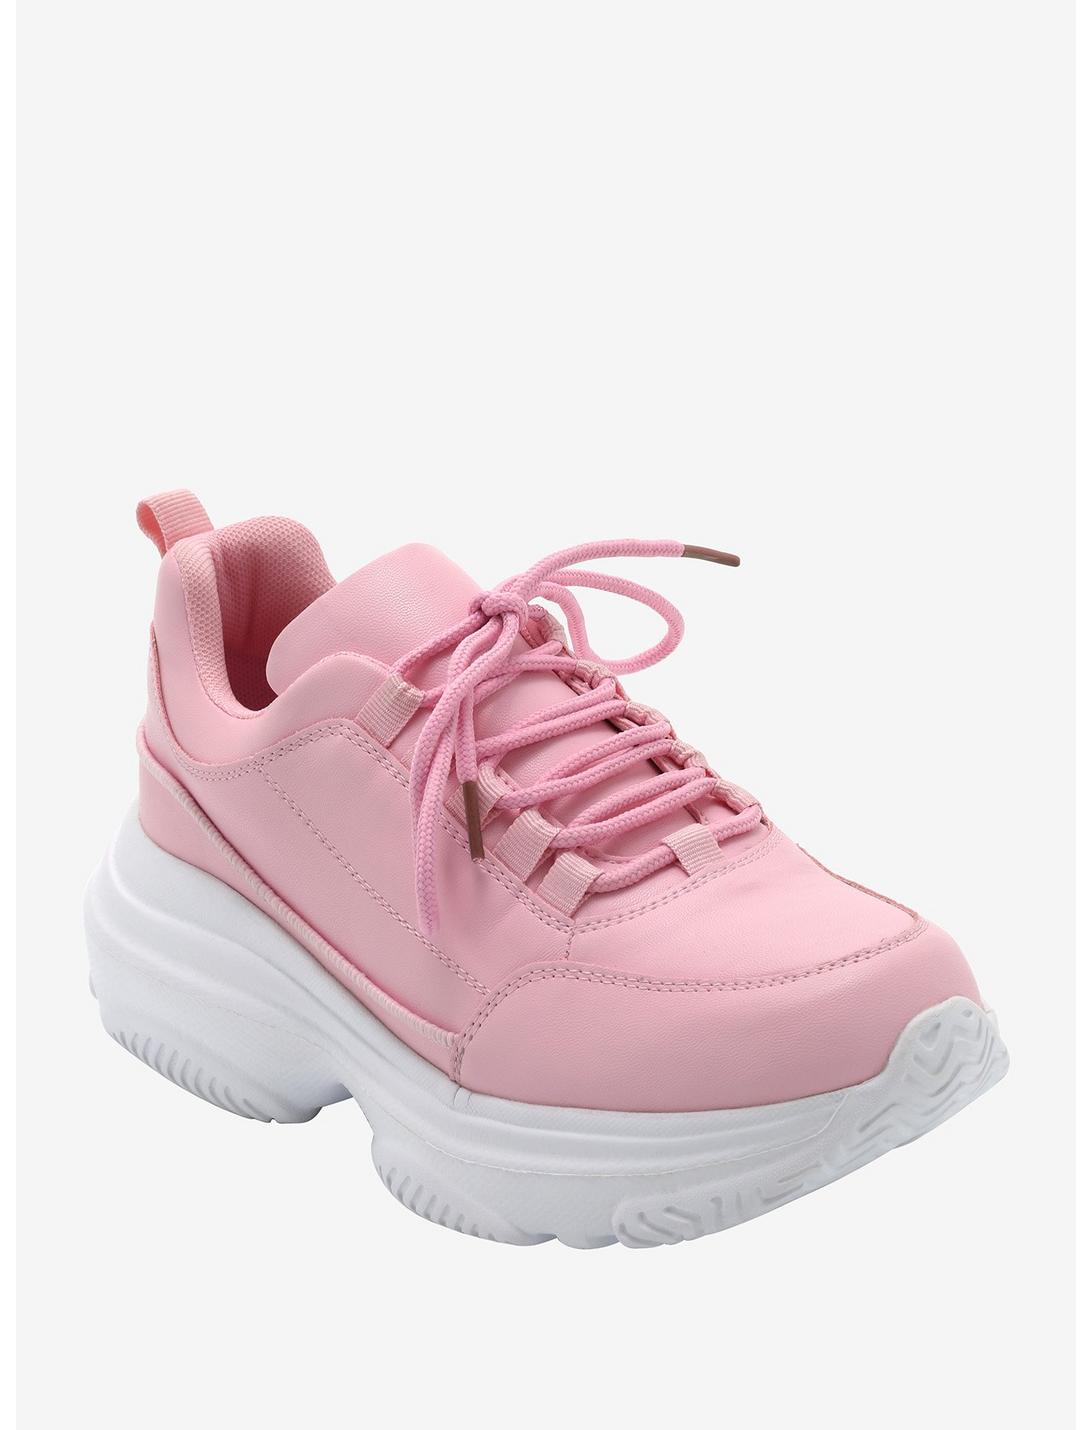 Pink Chunky Sneakers, PINK, hi-res